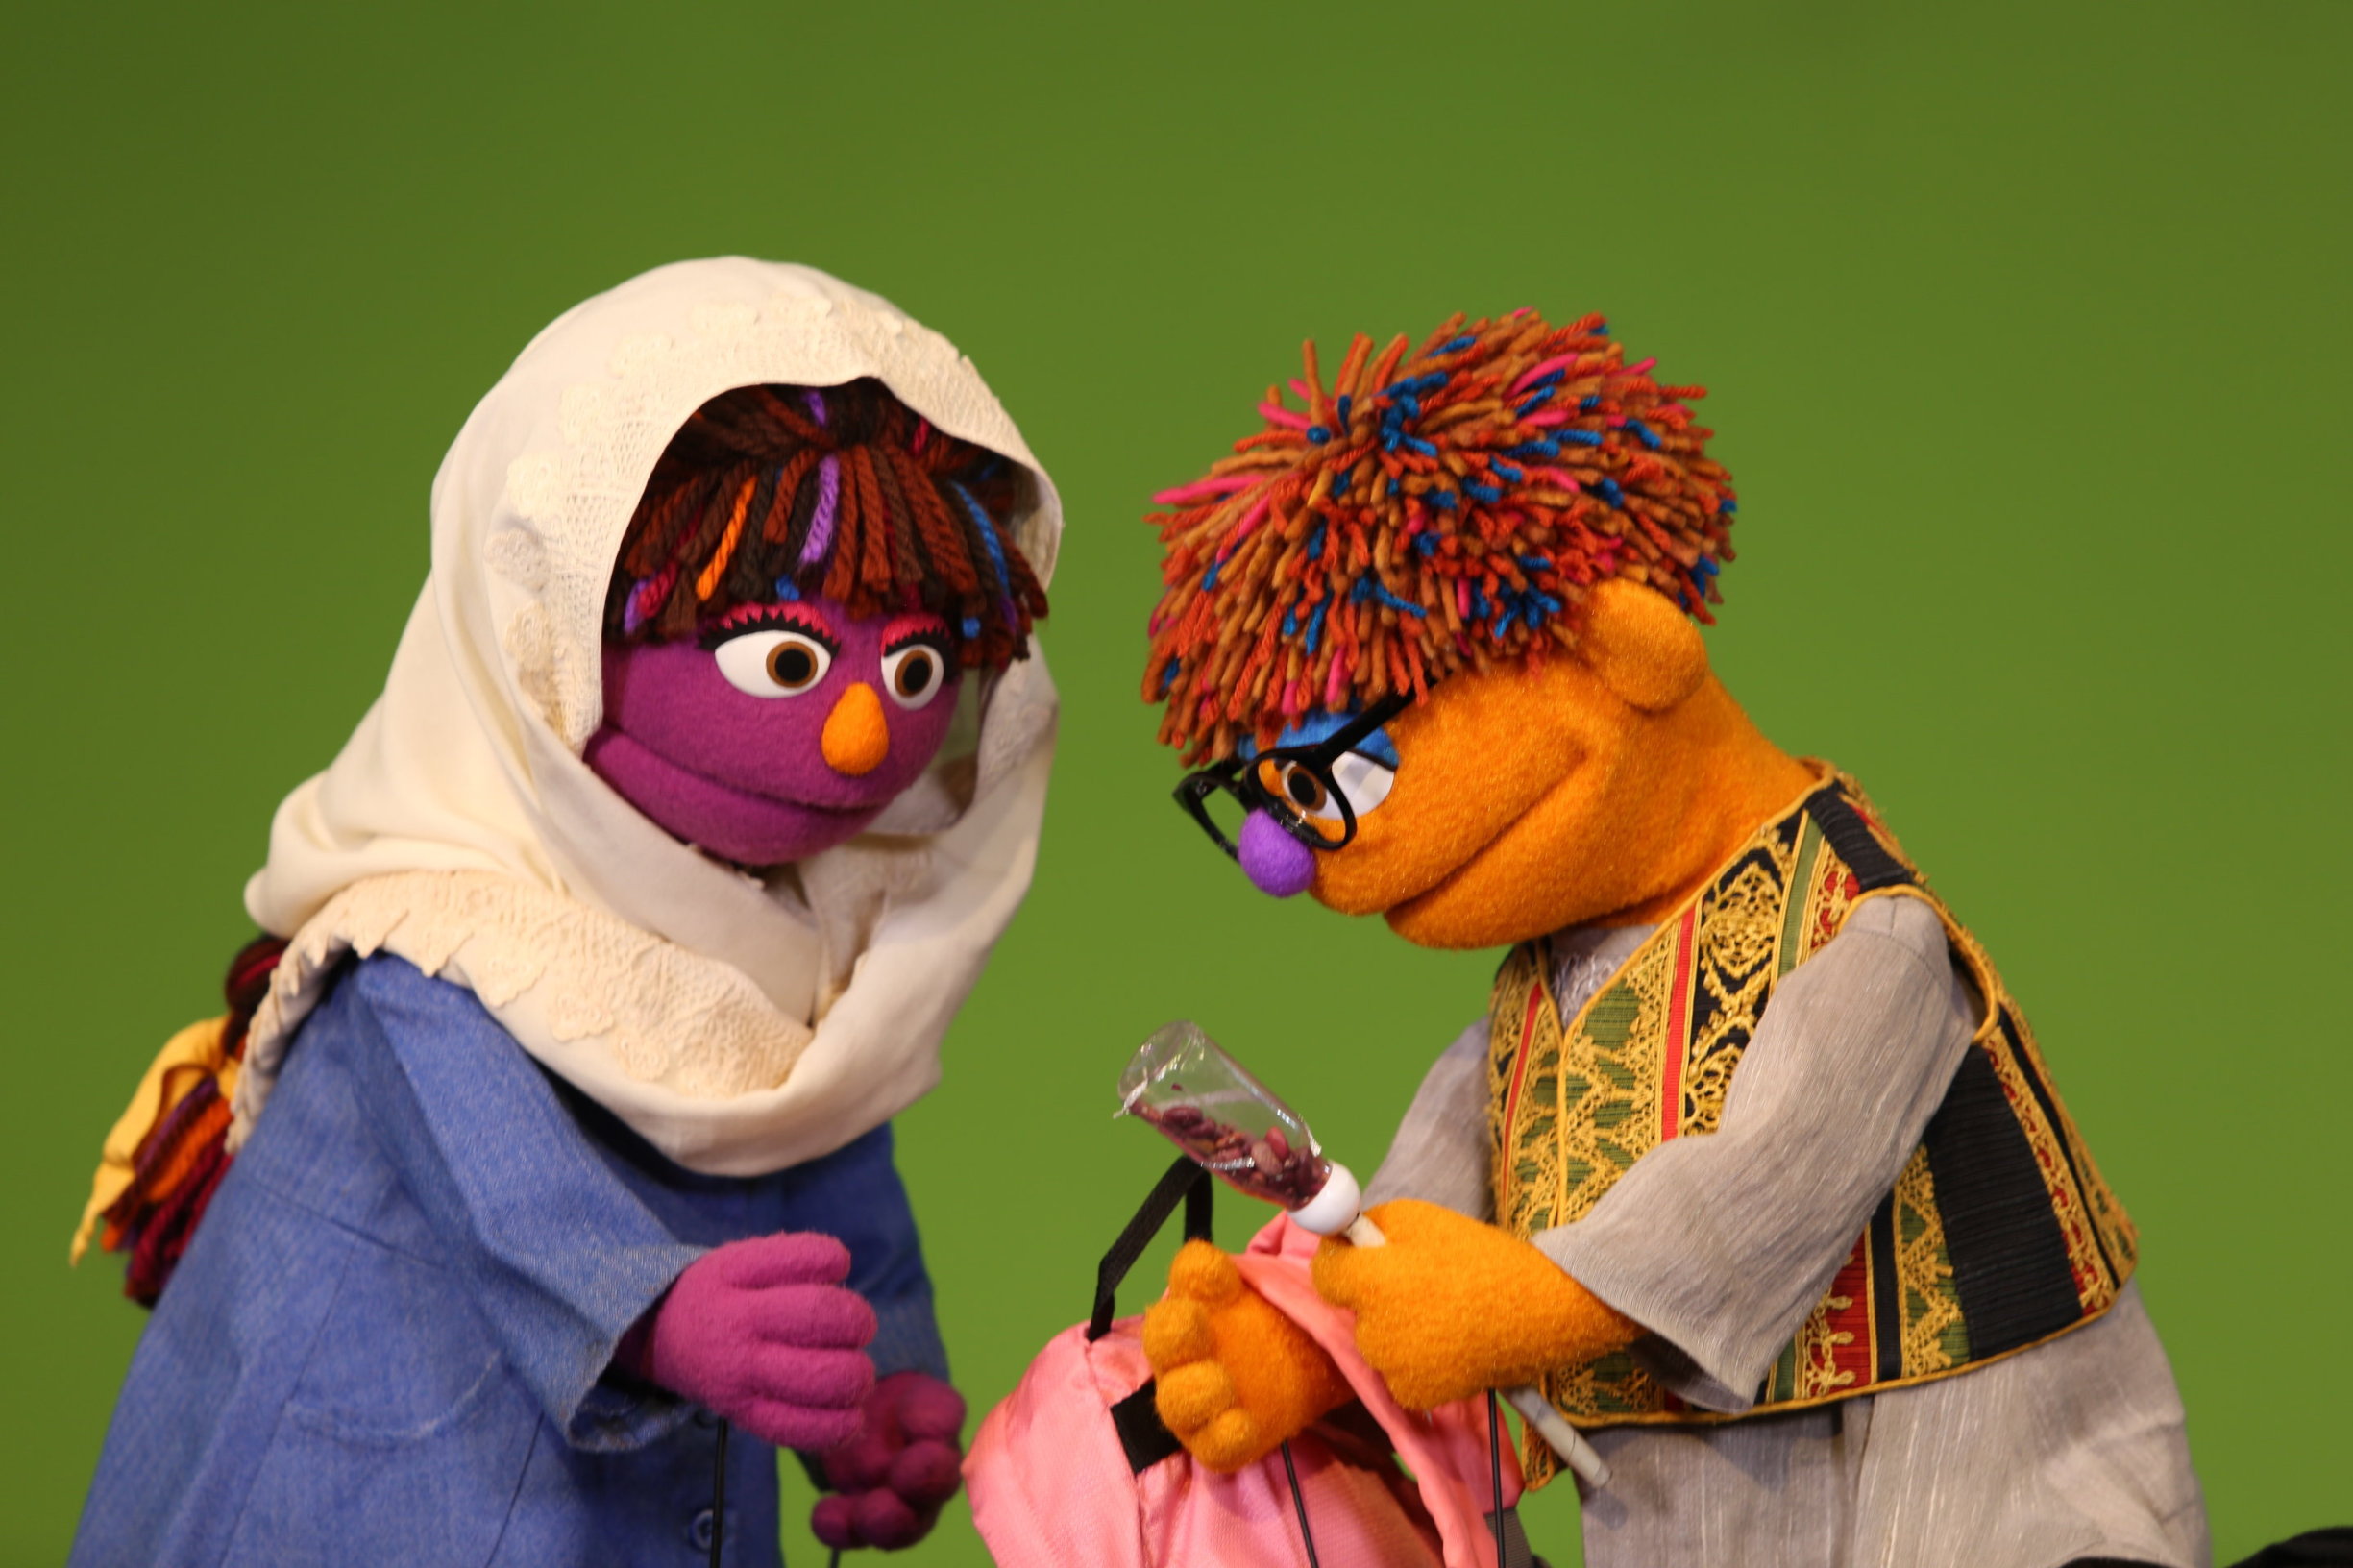 HANDOUT - Sirak, the new boy in the Afghani Sesame Street, photographed at his first appearance in the show 'Bache Simsim', the Afghani name of the Sesame Street, in Kabul, Afghanistan, 2 July 2017. Next to the confident character Sari, Sirak is the second local figure in the children's TV show in Afghanistan. Sirak is the small brother of Sari. Photo: Lapis Sesame Workshop/dpa